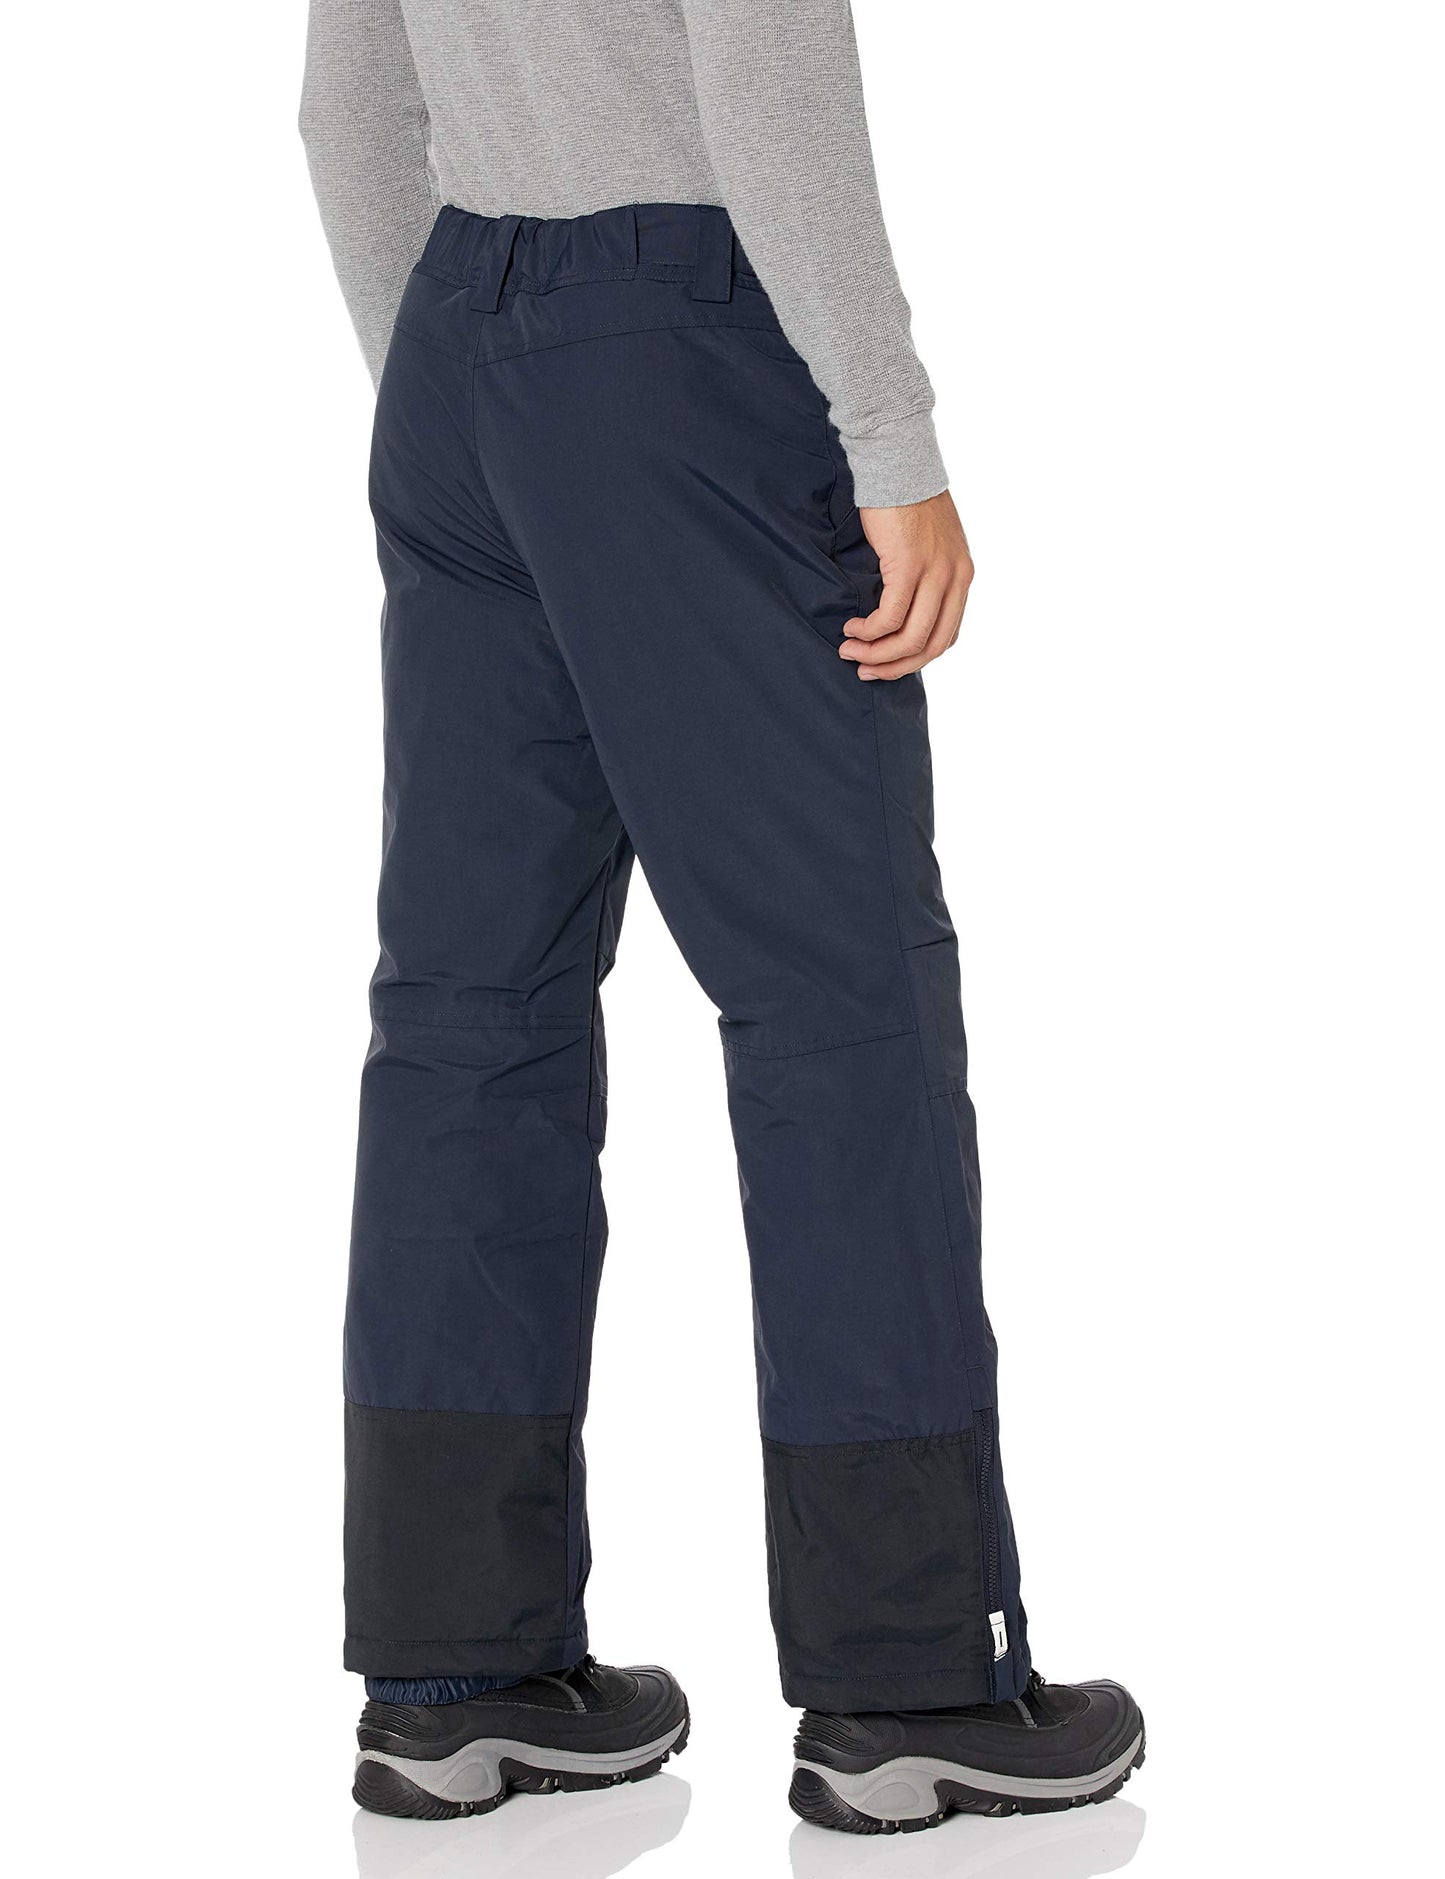 Amazon Essentials Men's Water-Resistant Insulated Snow Pant, Navy, Large